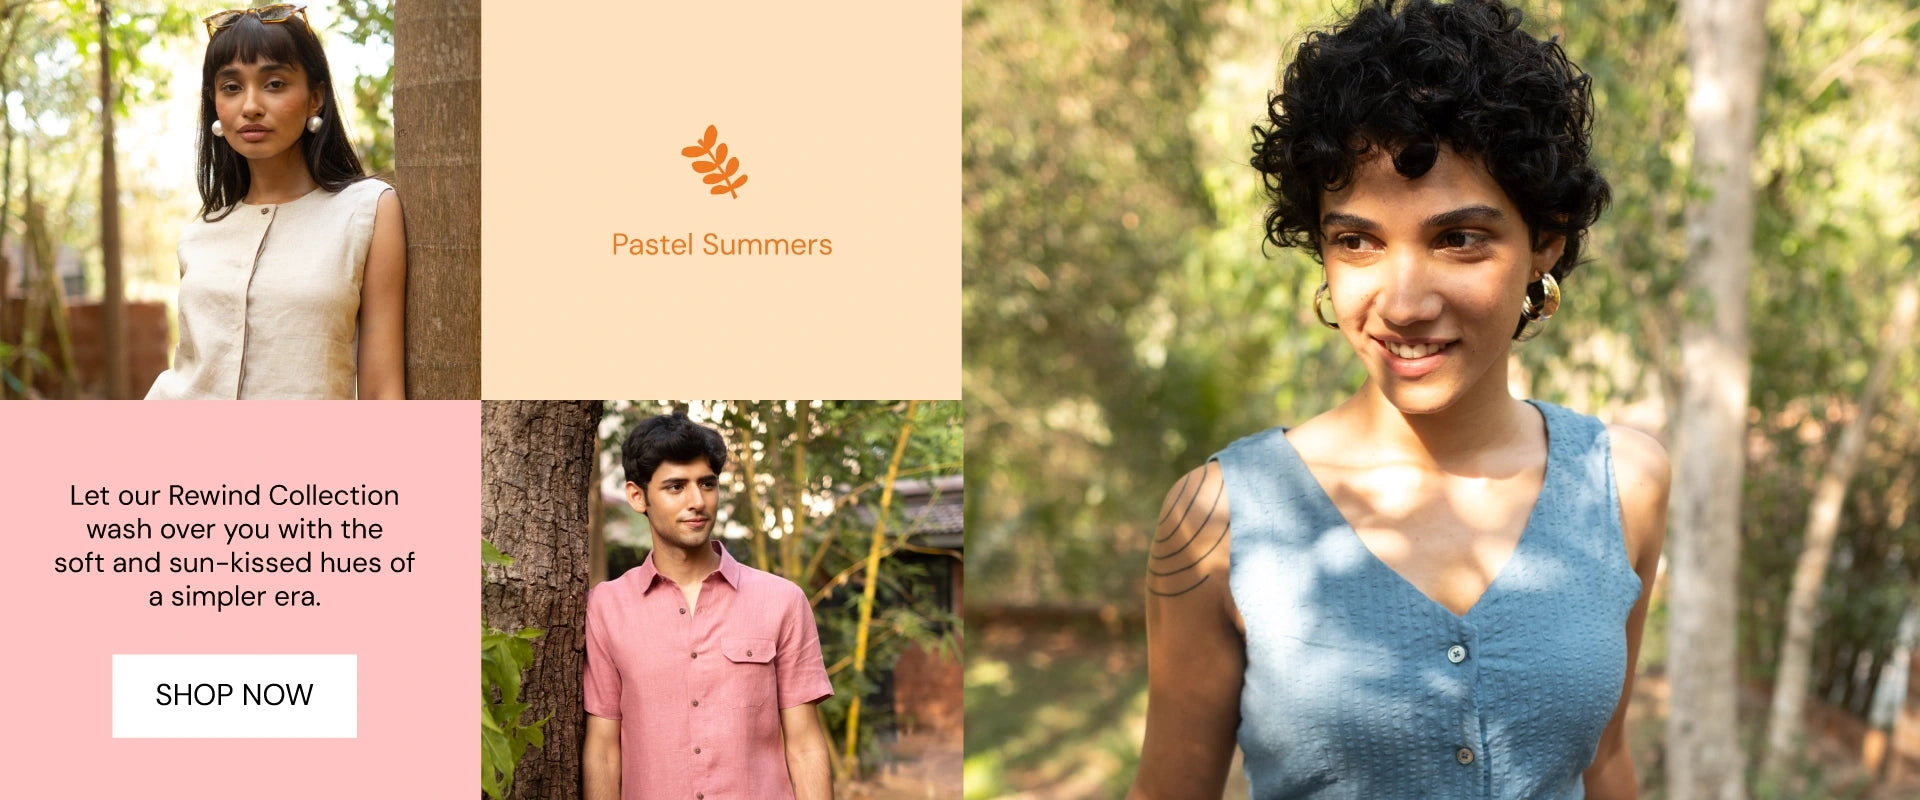 Pastel Summers Collection Image